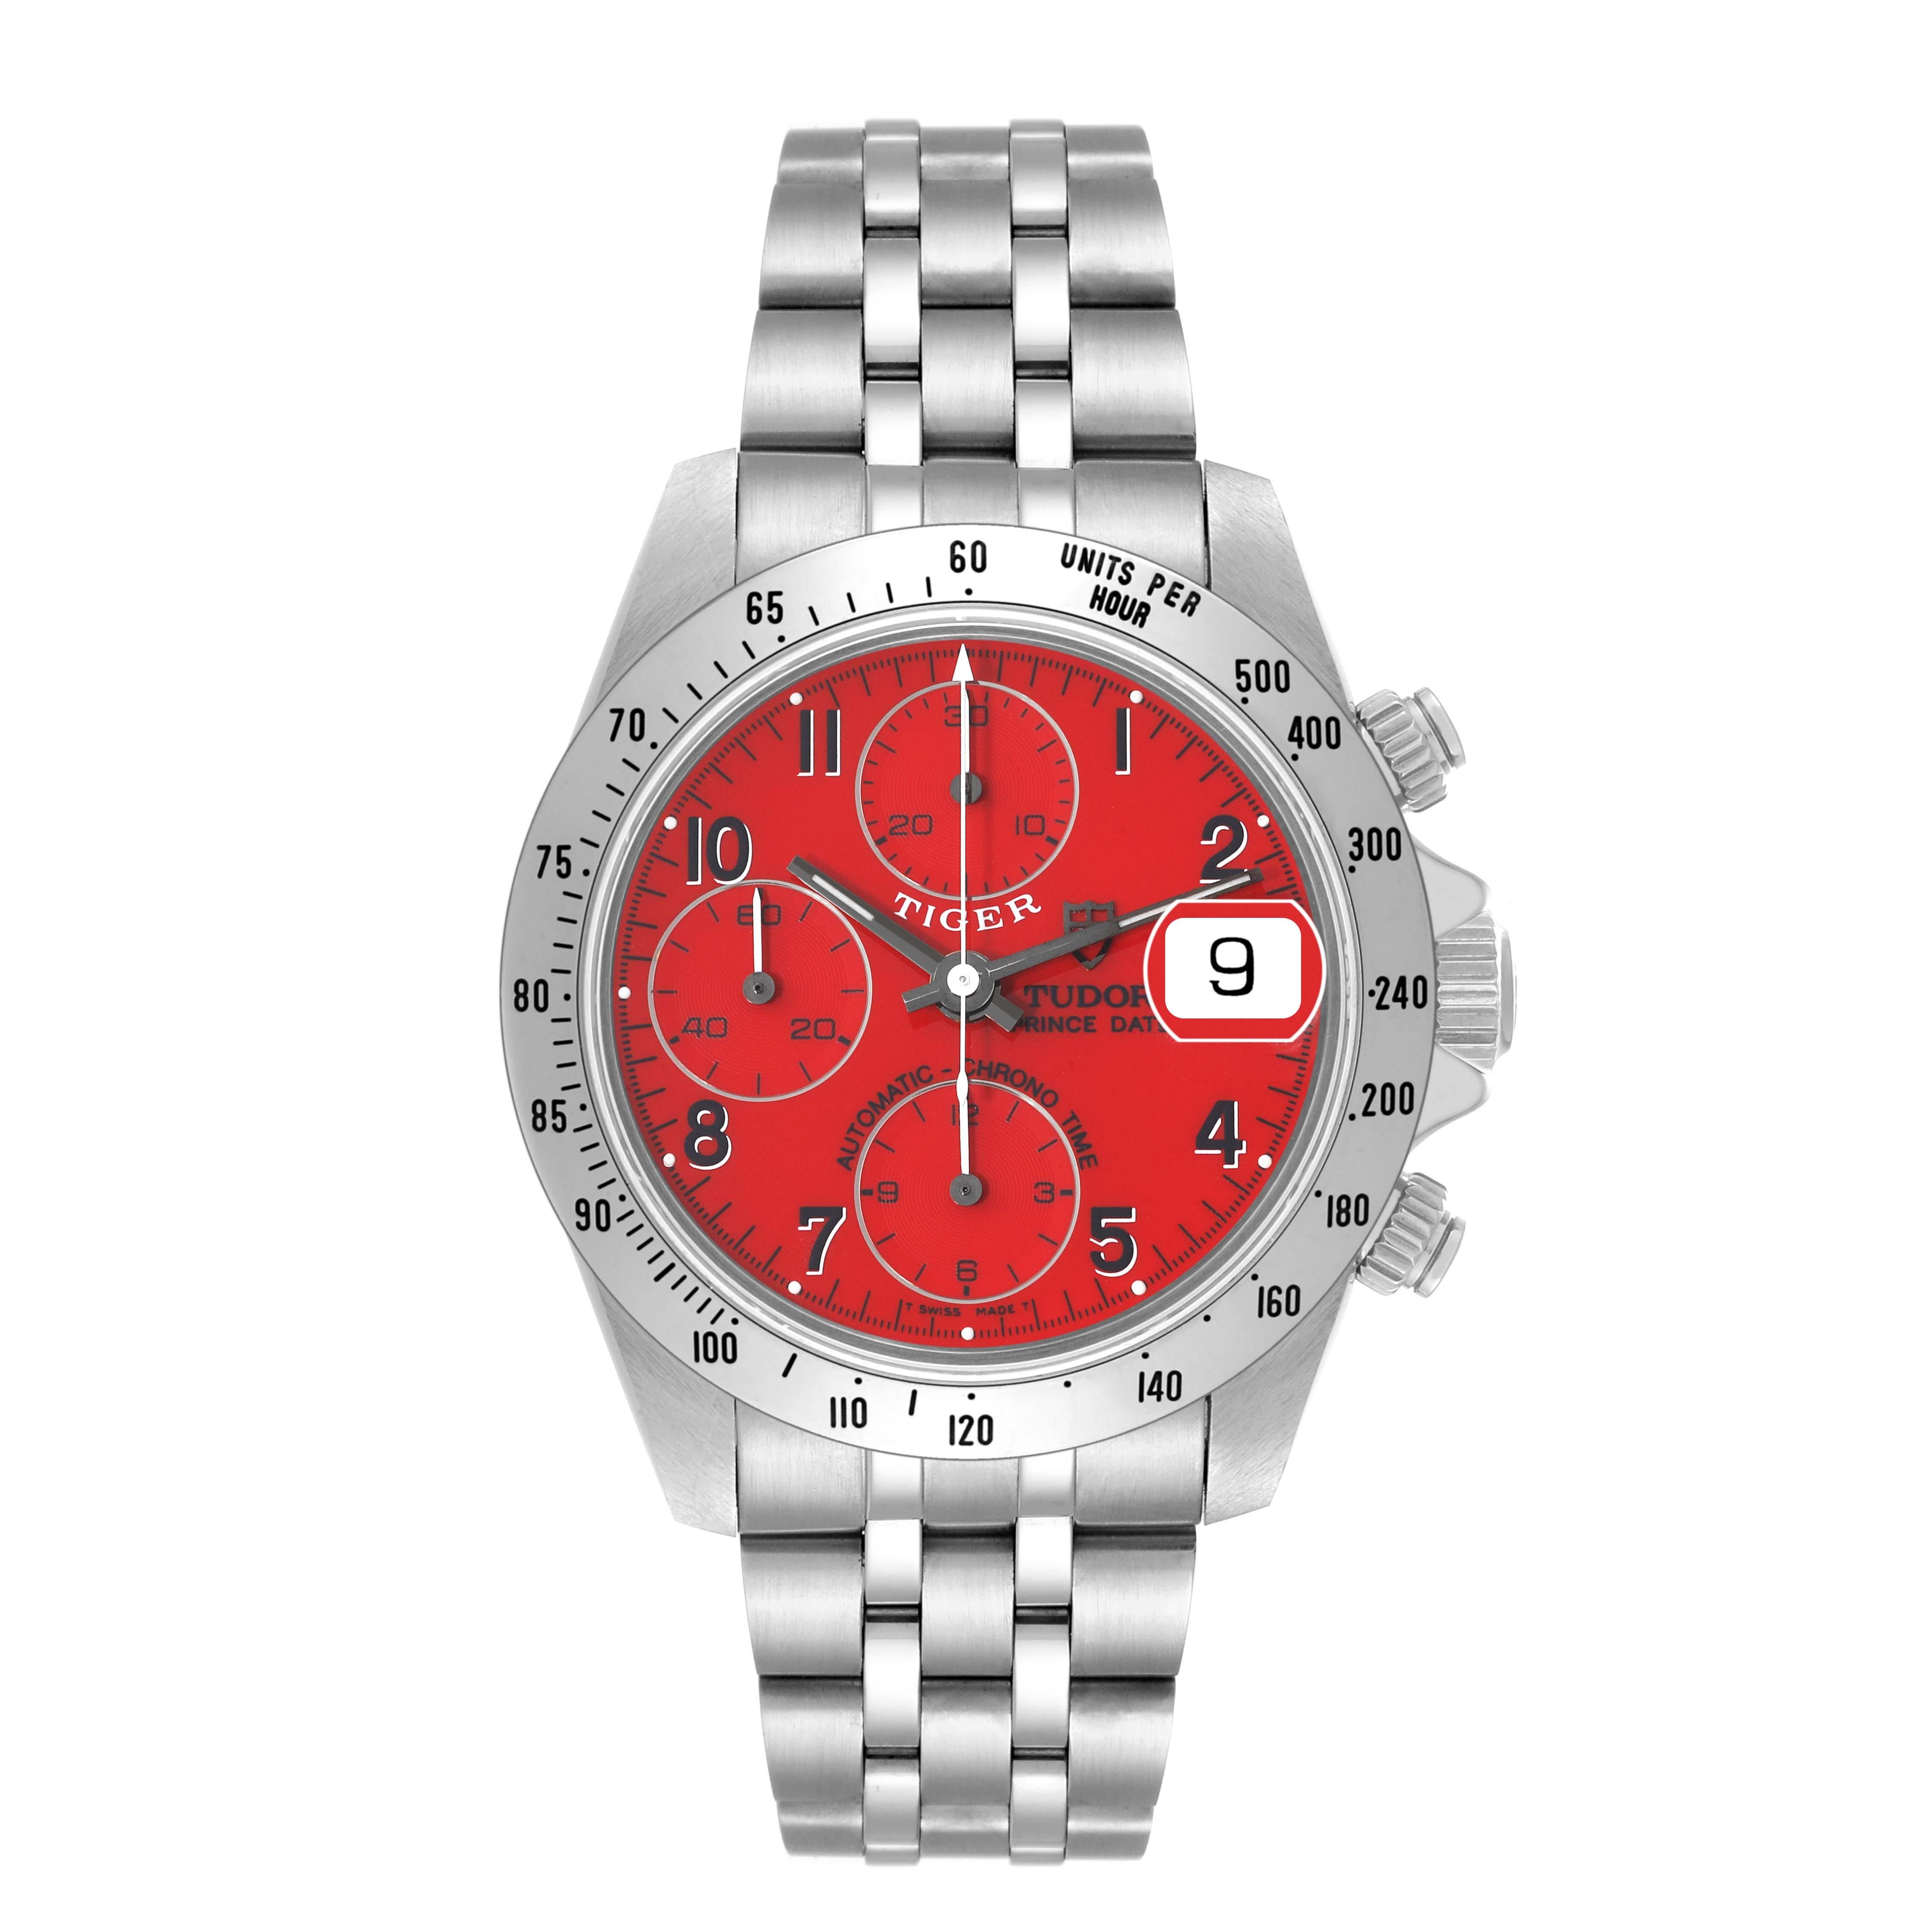 Tudor Tiger Prince Red Dial Chronograph Steel Mens Watch 79280 Box Papers. Automatic self-winding movement with chronograph function. Stainless steel oyster case 40.0 mm in diameter. Tudor logo on a crown. Stainless steel tachometer bezel. Scratch